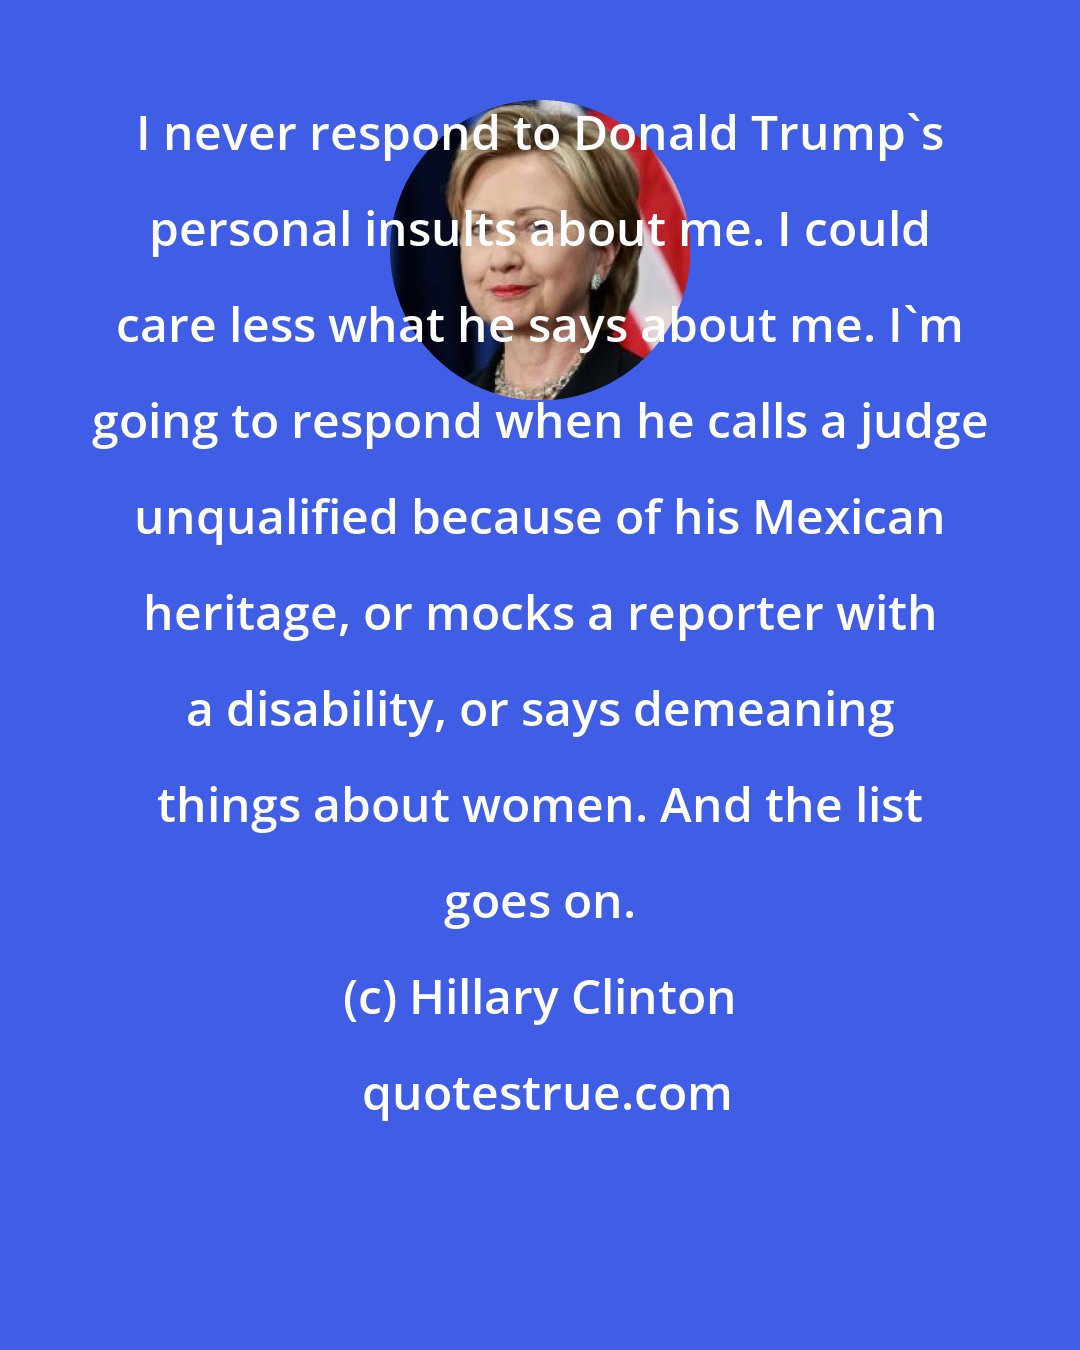 Hillary Clinton: I never respond to Donald Trump's personal insults about me. I could care less what he says about me. I'm going to respond when he calls a judge unqualified because of his Mexican heritage, or mocks a reporter with a disability, or says demeaning things about women. And the list goes on.